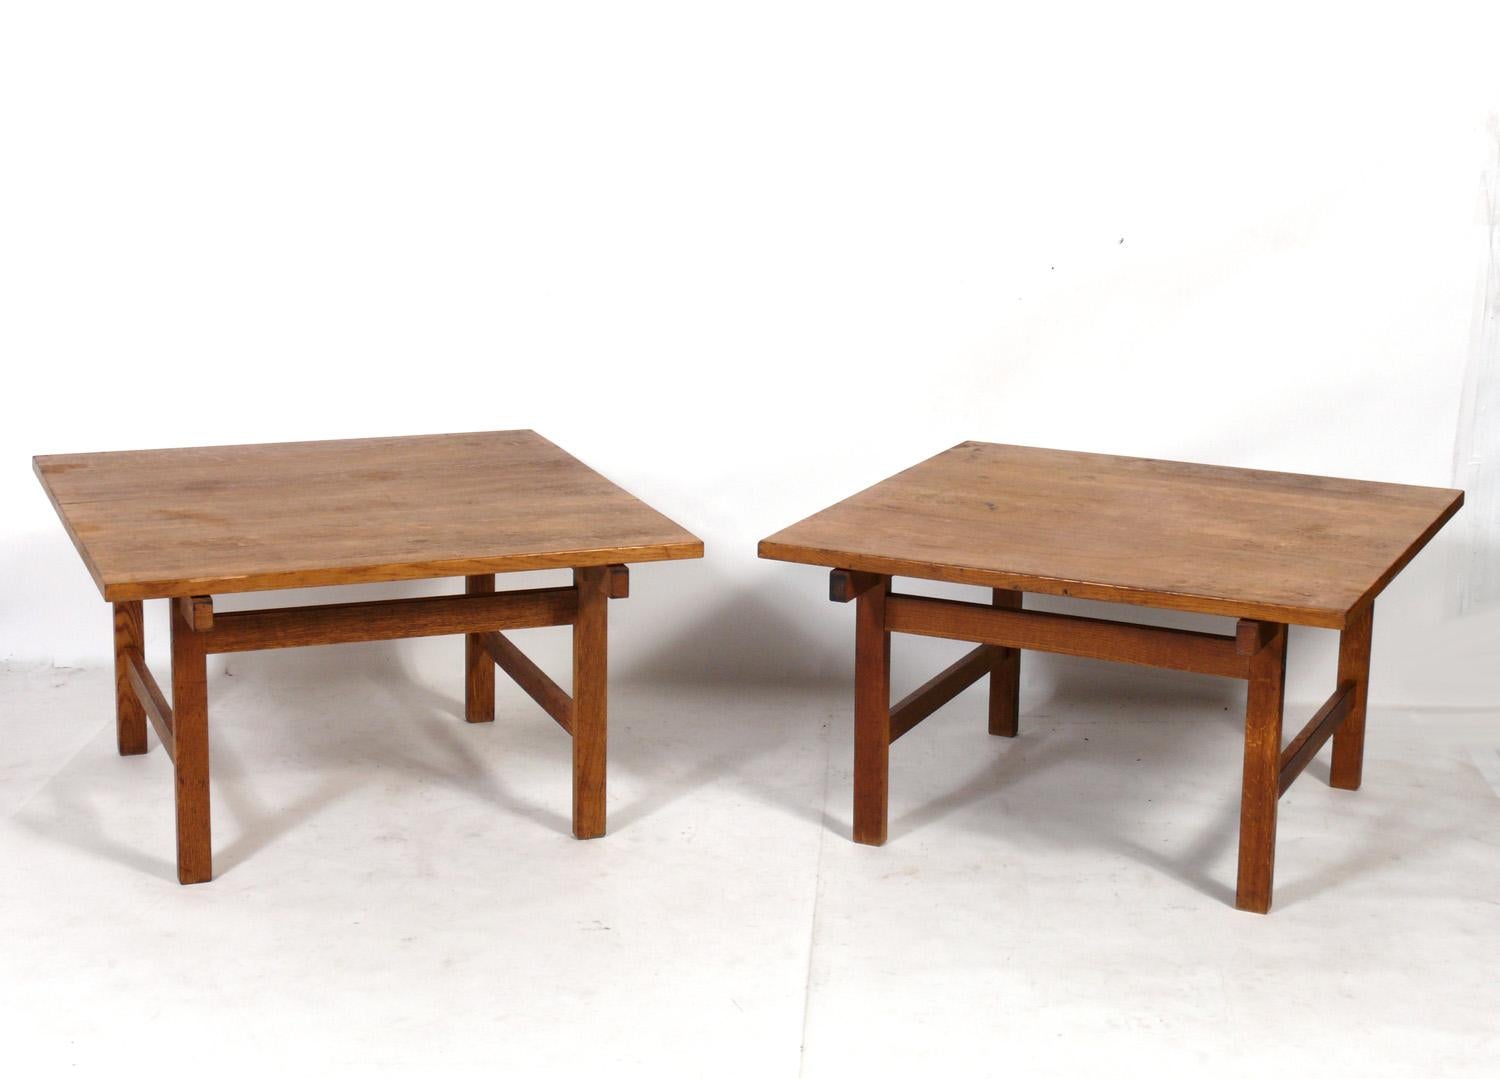 Pair of large scale Danish Modern oak end tables, designed by Hans Wegner for Andreus Tuck, Denmark, circa 1950s. These tables are currently being refinished and will look great when completed. They are a versatile size and can be used as end or